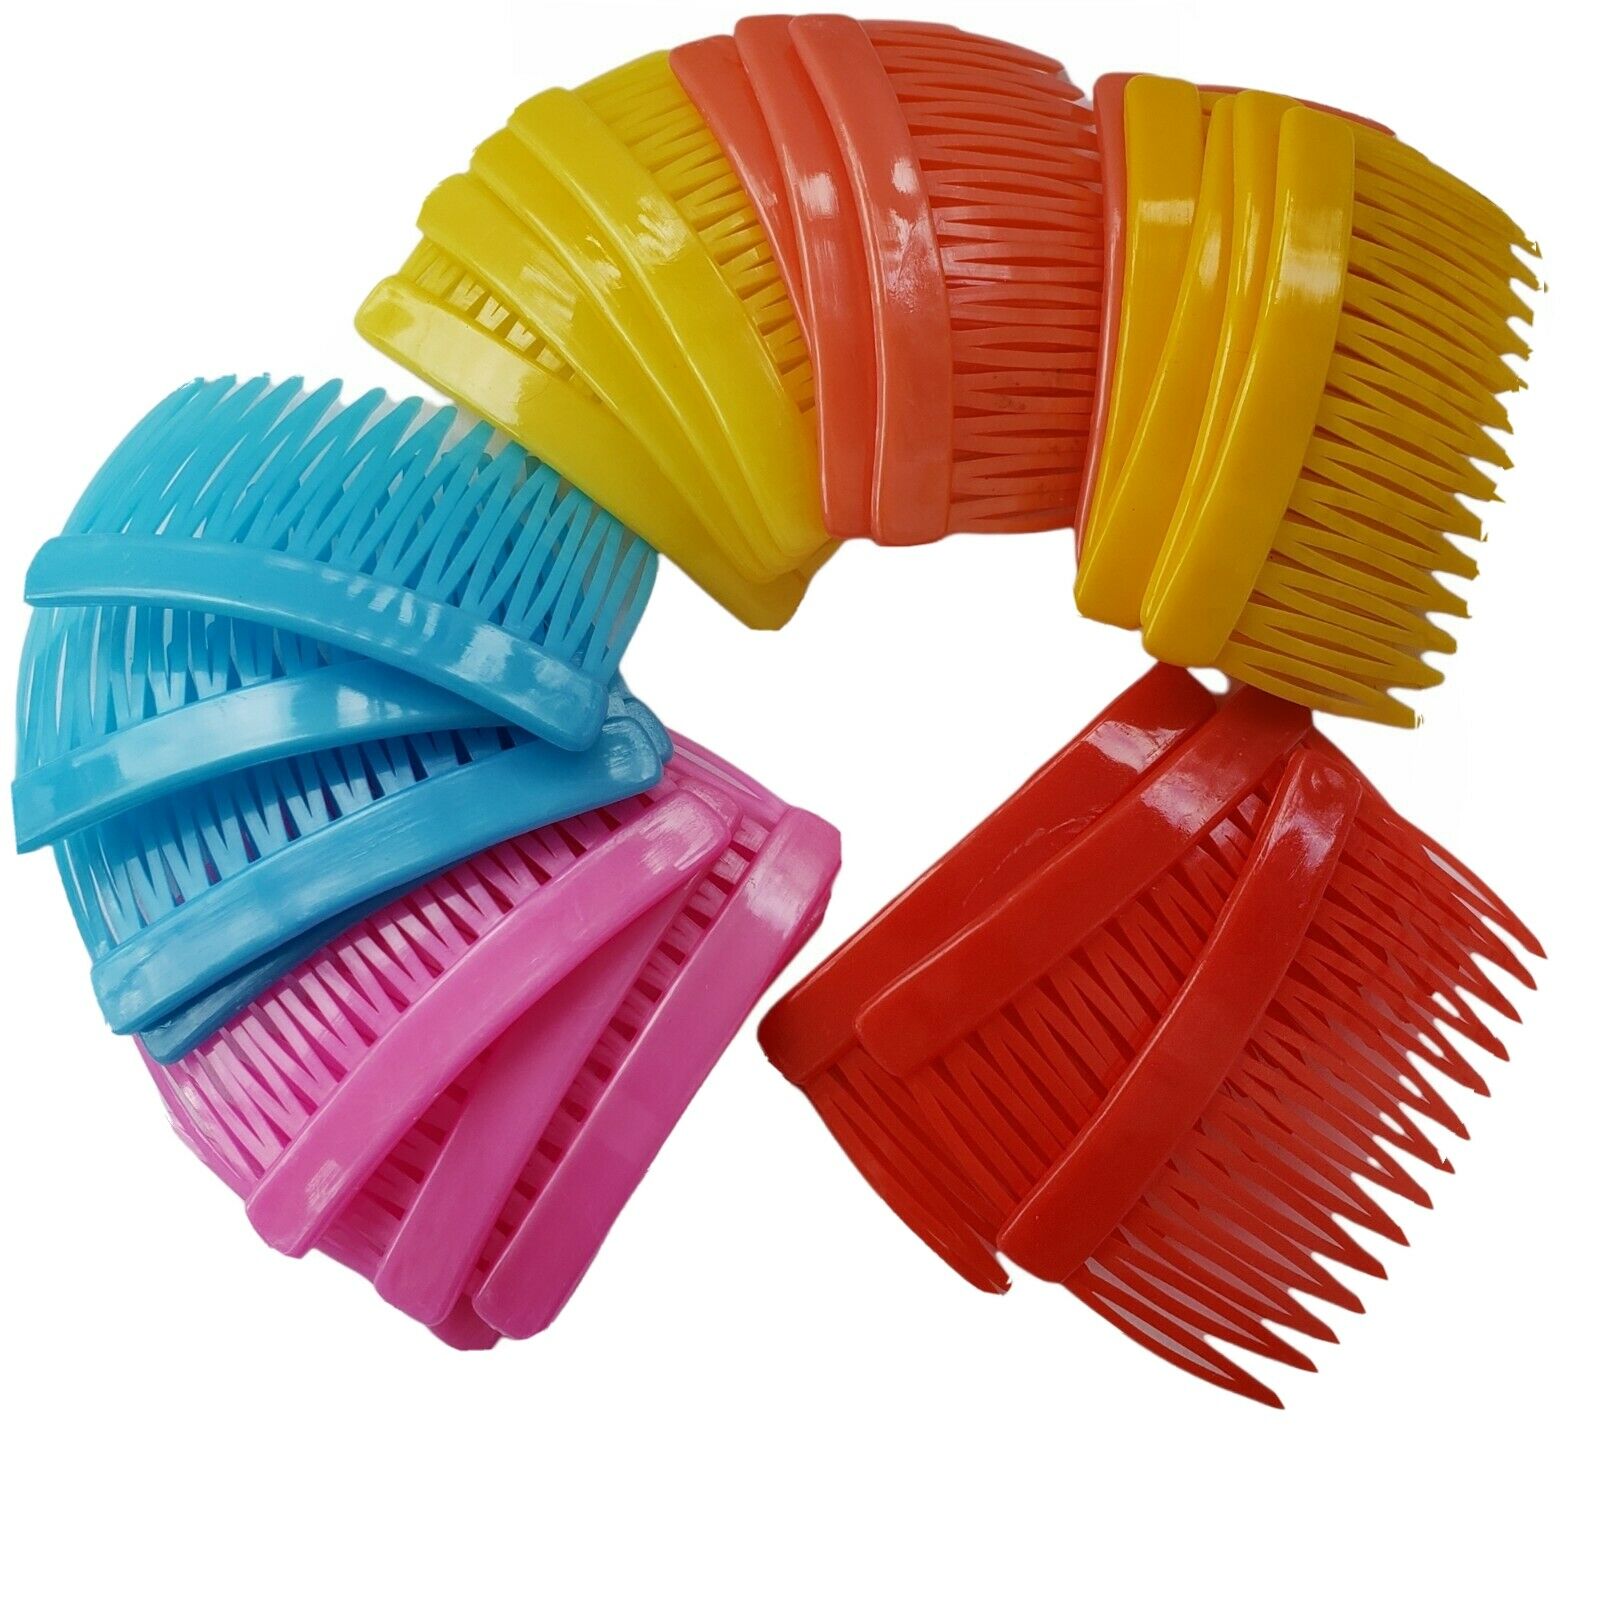 Vintage Hair Kant Slip Side Combs Plastic Teeth Combs Multicolor Lot Of 24 Combs